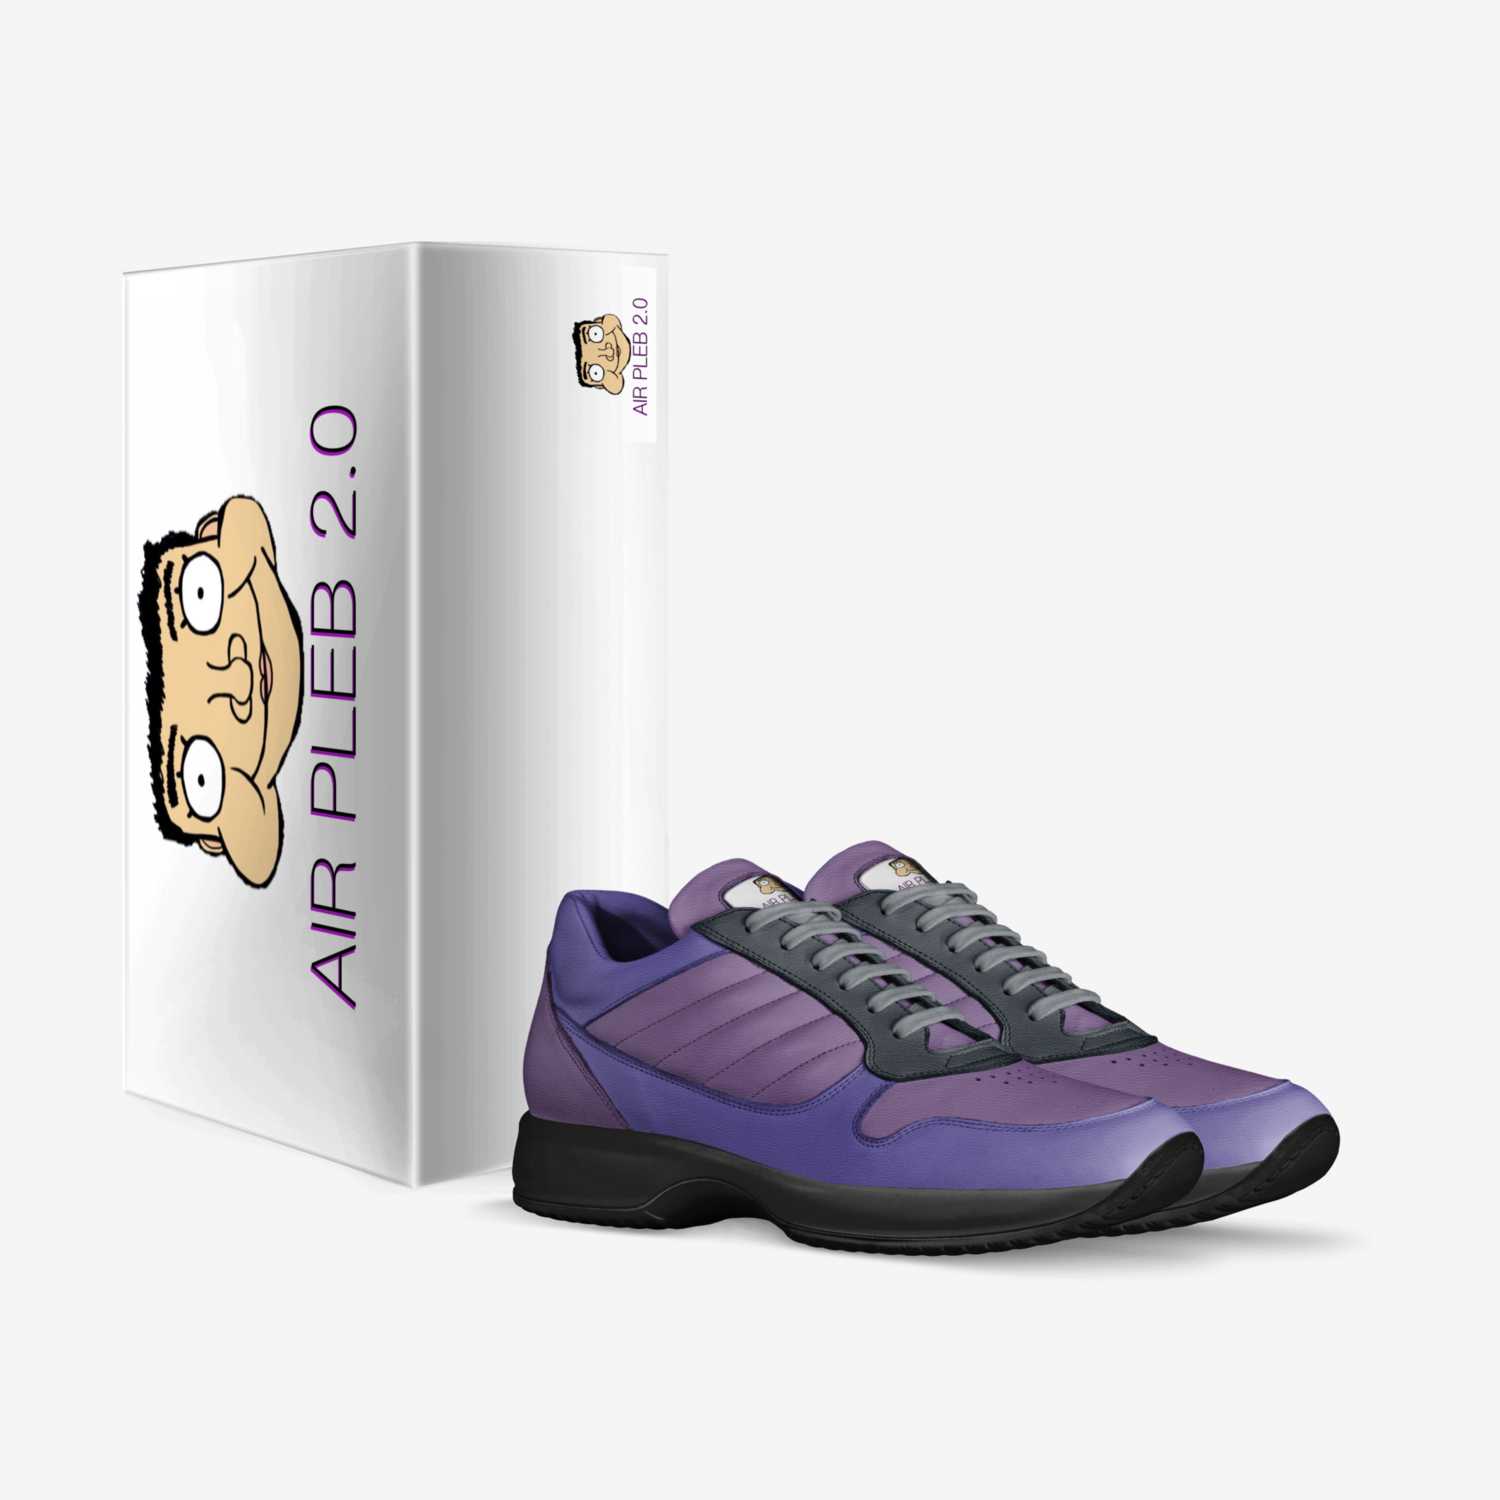 Air Pleb 2.0 custom made in Italy shoes by Hayden Bagley | Box view